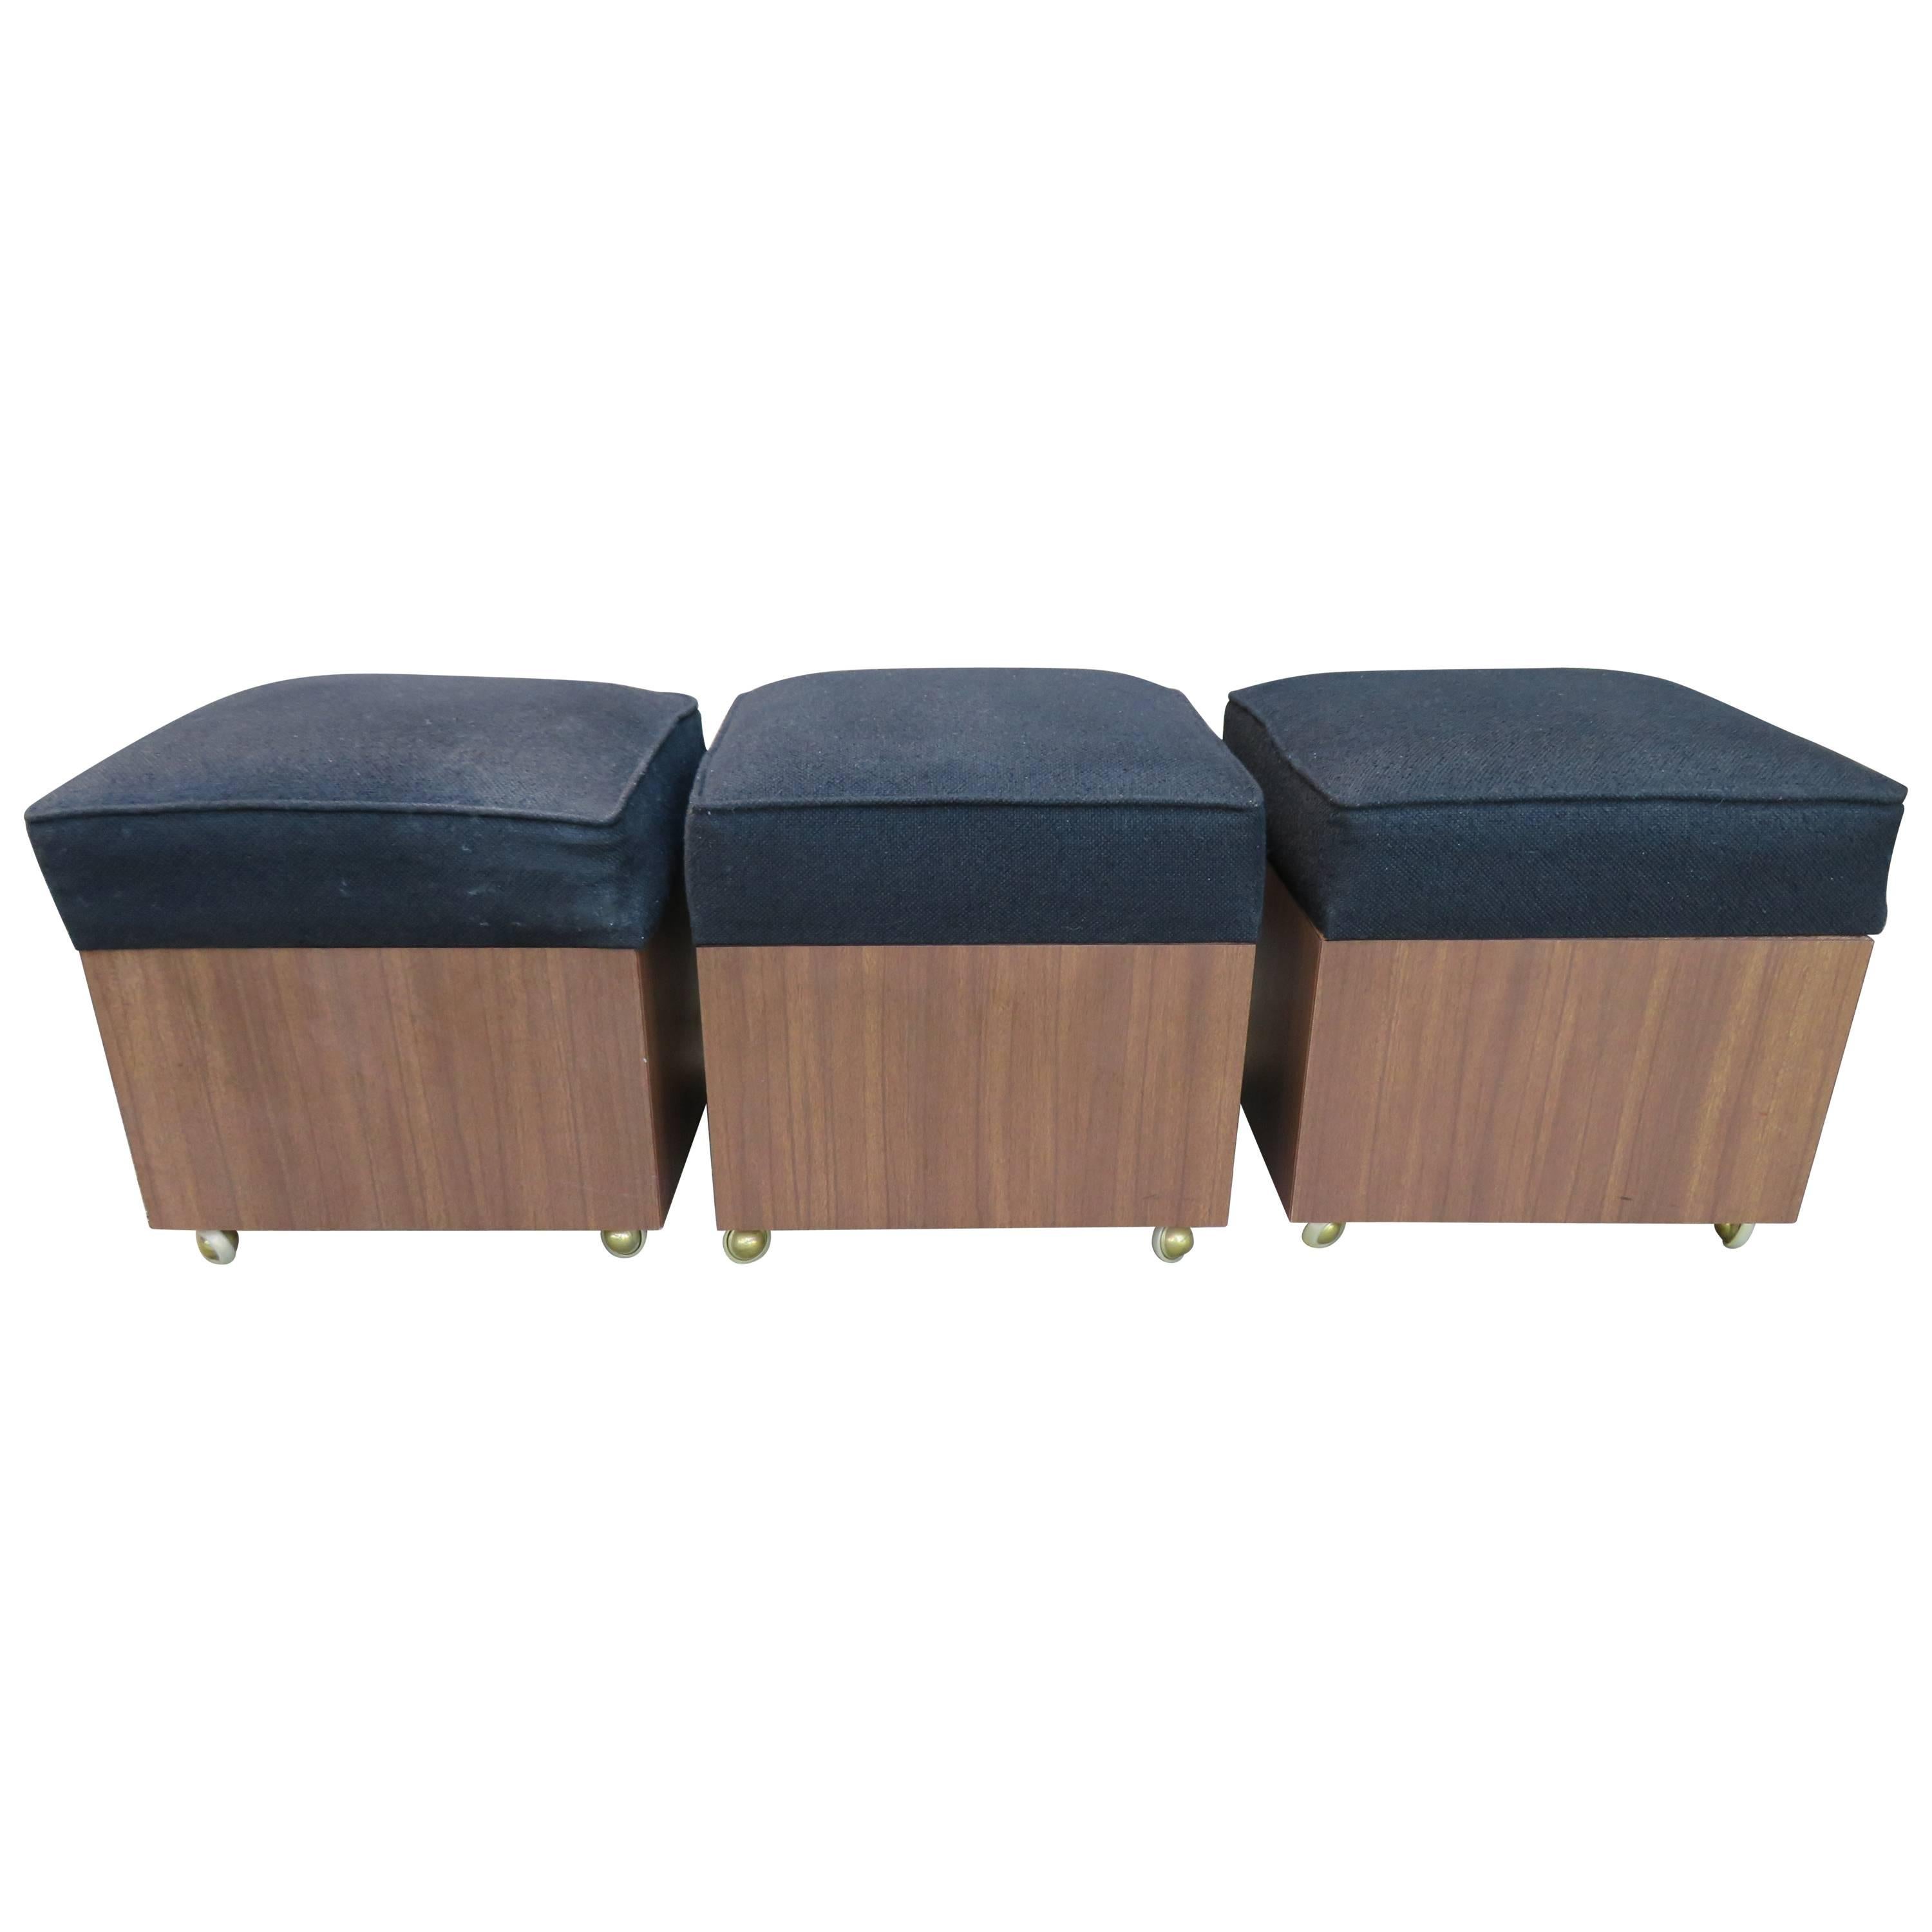 Lovely Set of Three Rolling Storage Cube Stools, Mid-Century Modern For Sale